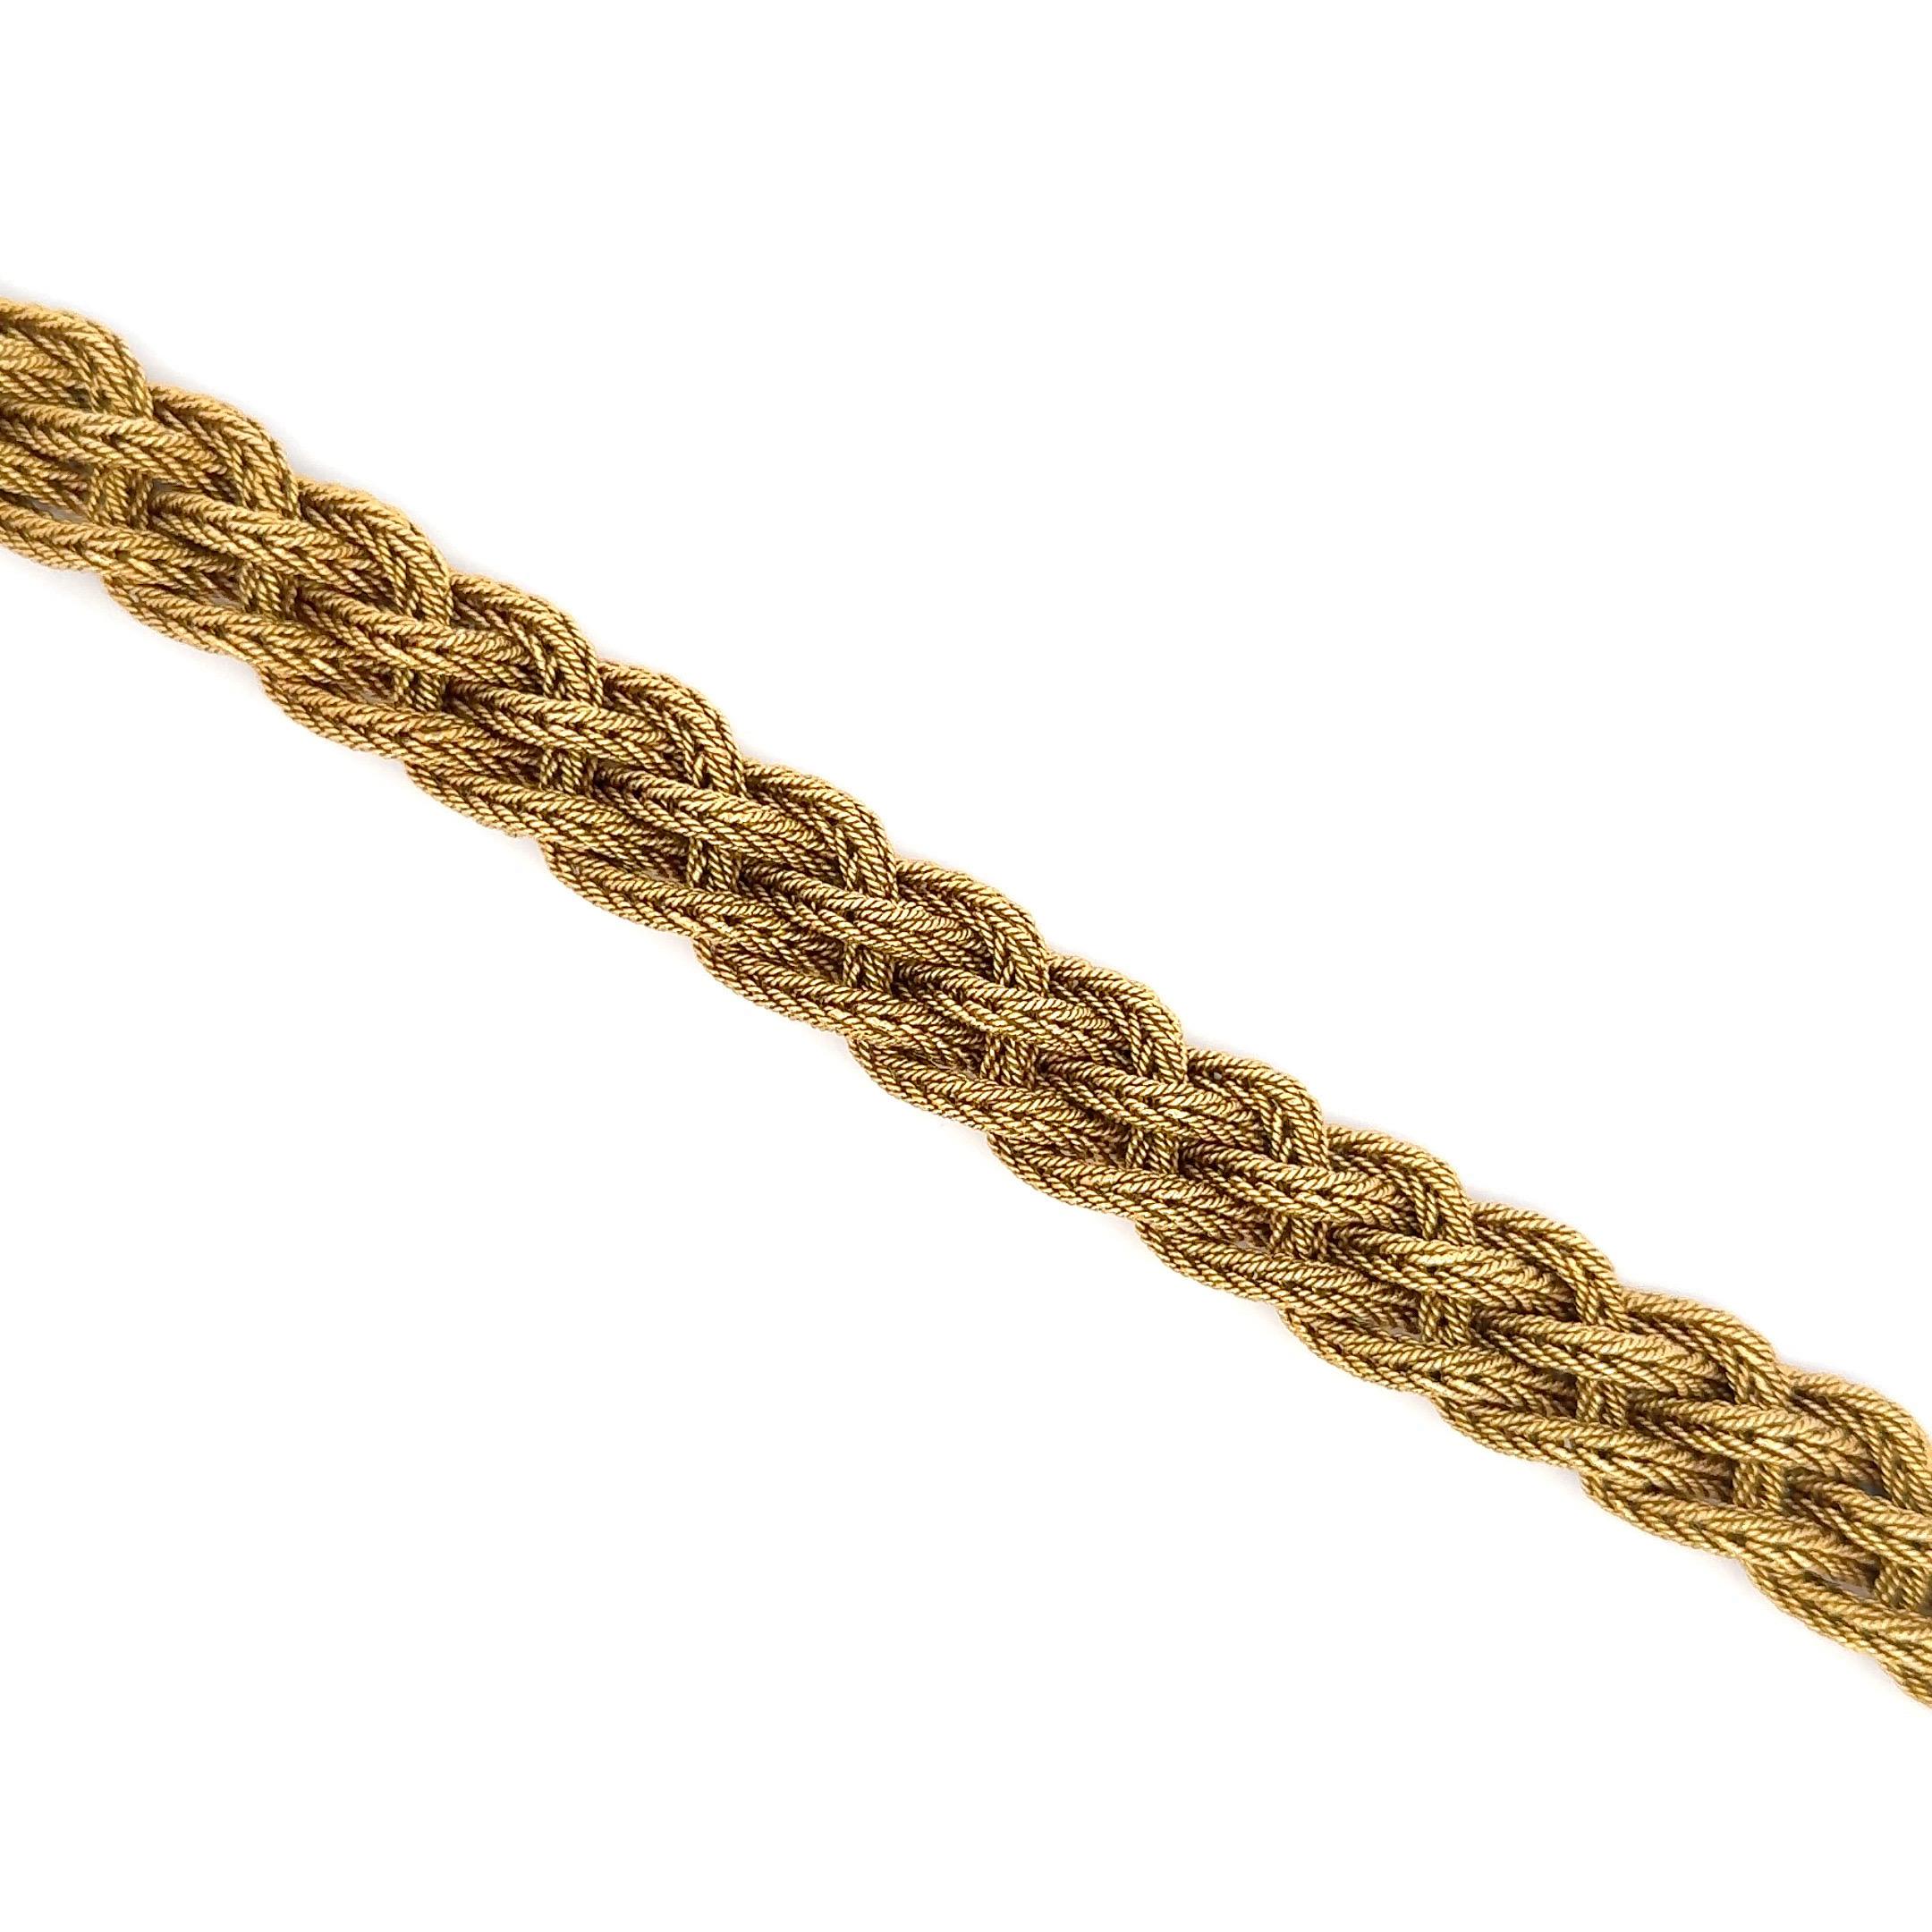 Heavy 18 Karat Yellow Gold Woven Braided Bracelet 77.7 Grams  In Excellent Condition For Sale In New York, NY